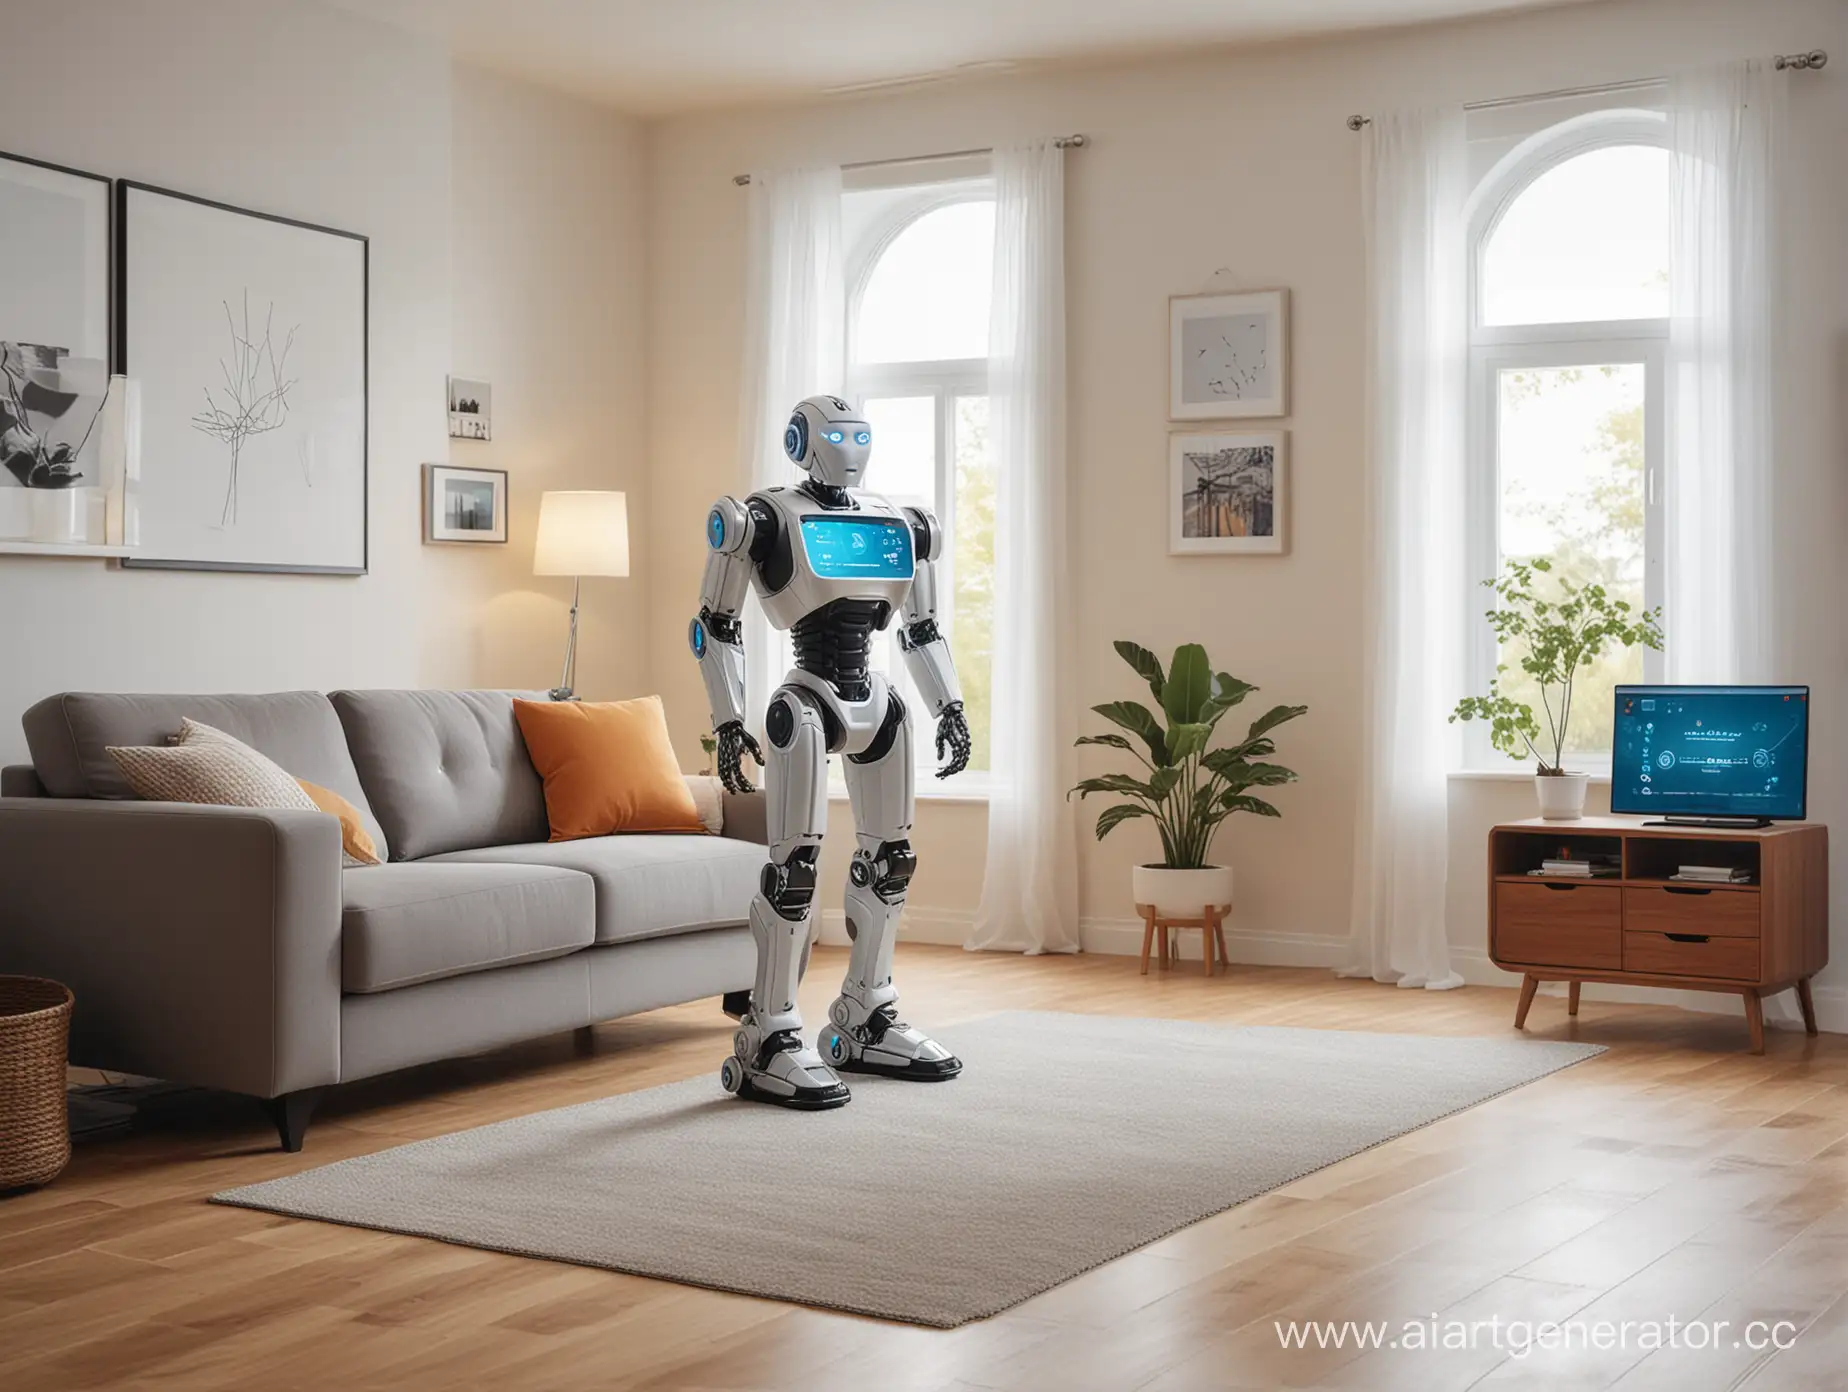 a living room where a robot rides and does everything around the house
; household appliances for the house of the future
